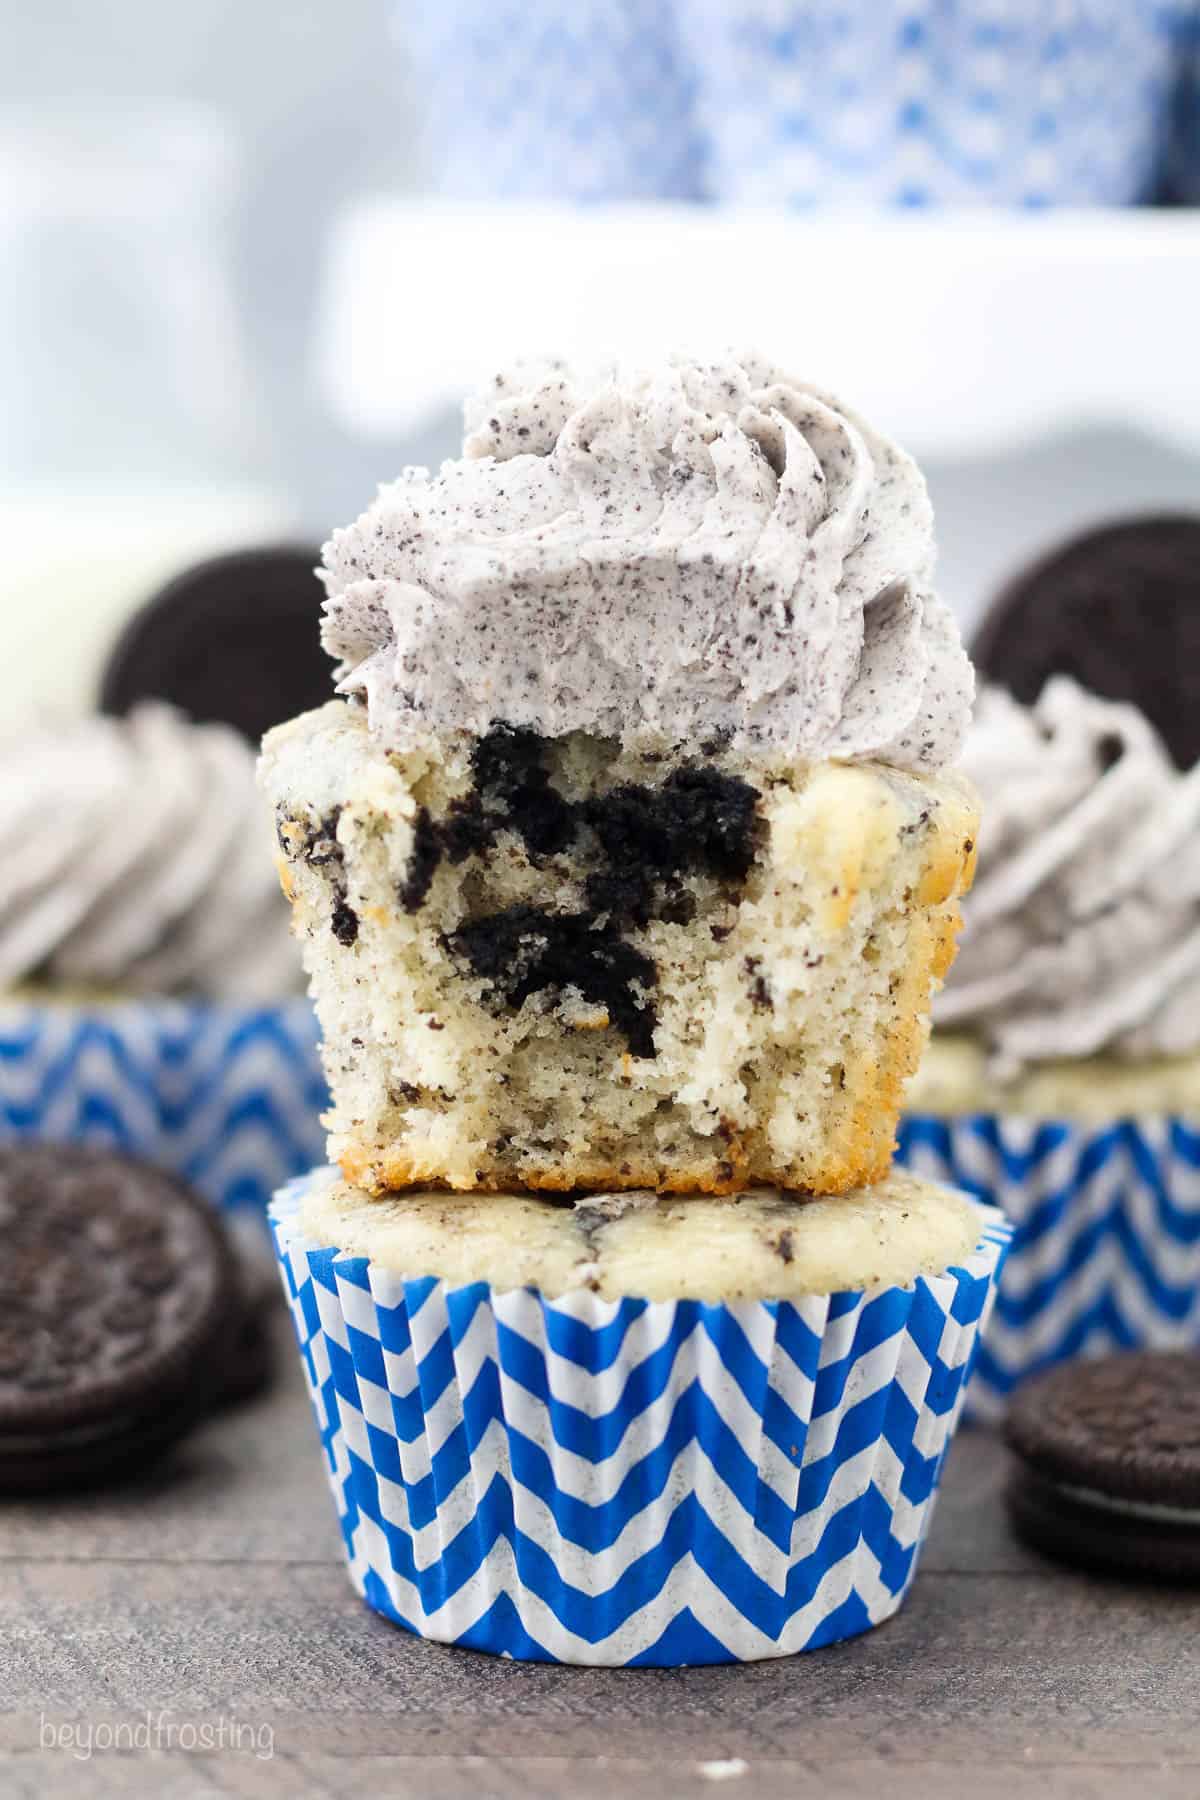 A frosted Oreo cupcake with a bite missing stacked on an unfrosted cupcake, with more decorated cupcakes in the background.